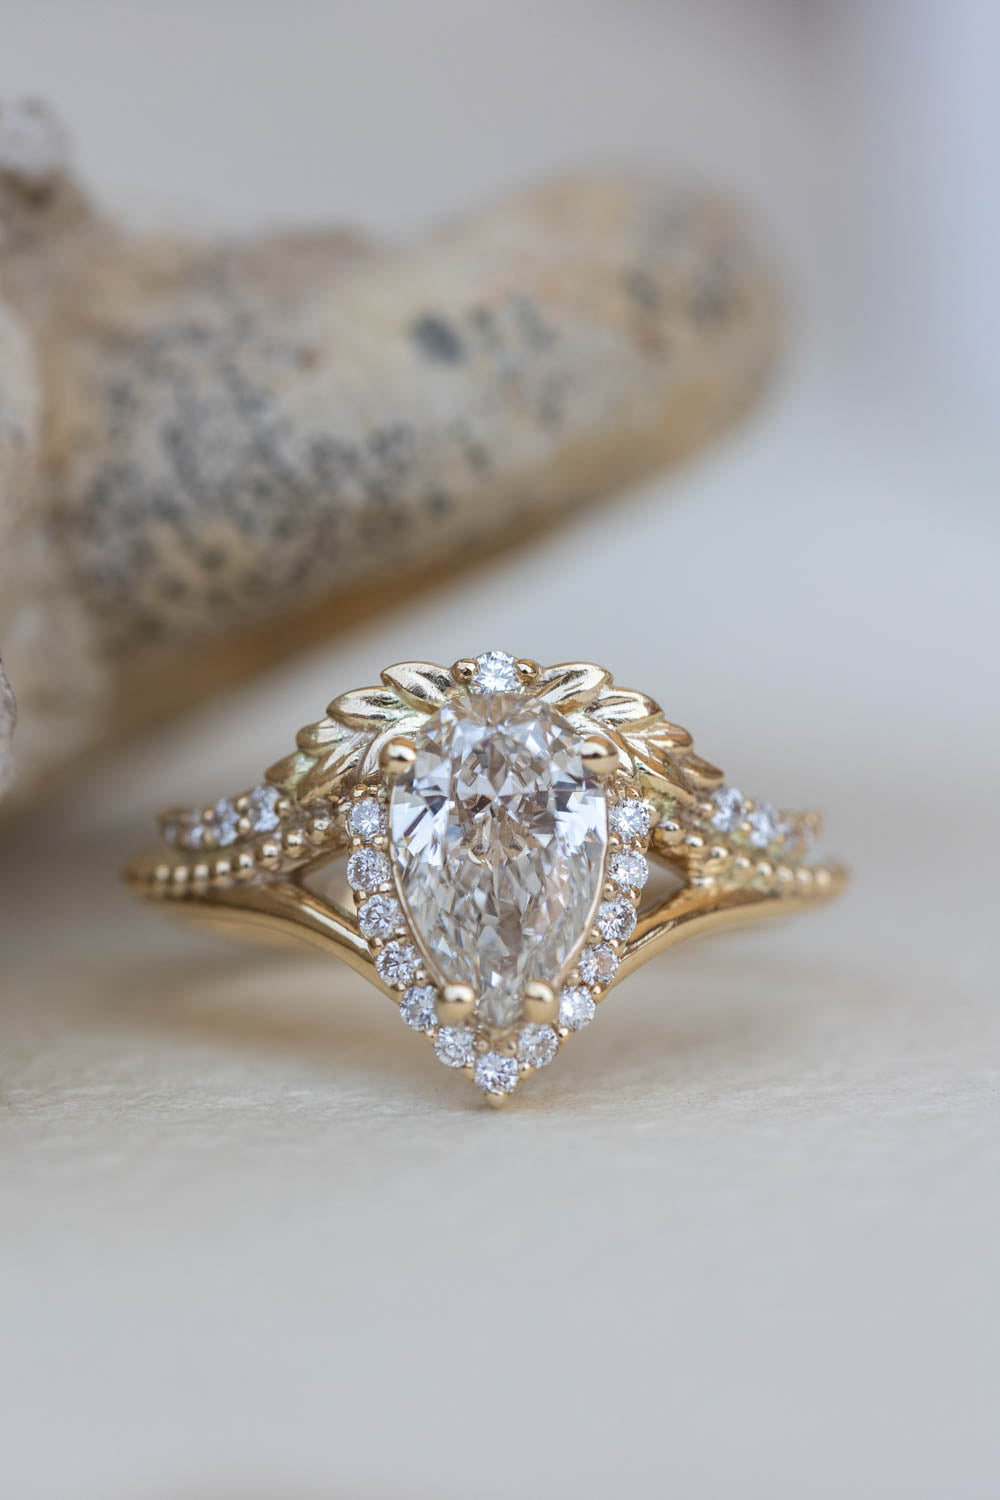 Lab grown diamond engagement ring, vintage inspired engagement ring / Lida  small | Eden Garden Jewelry™